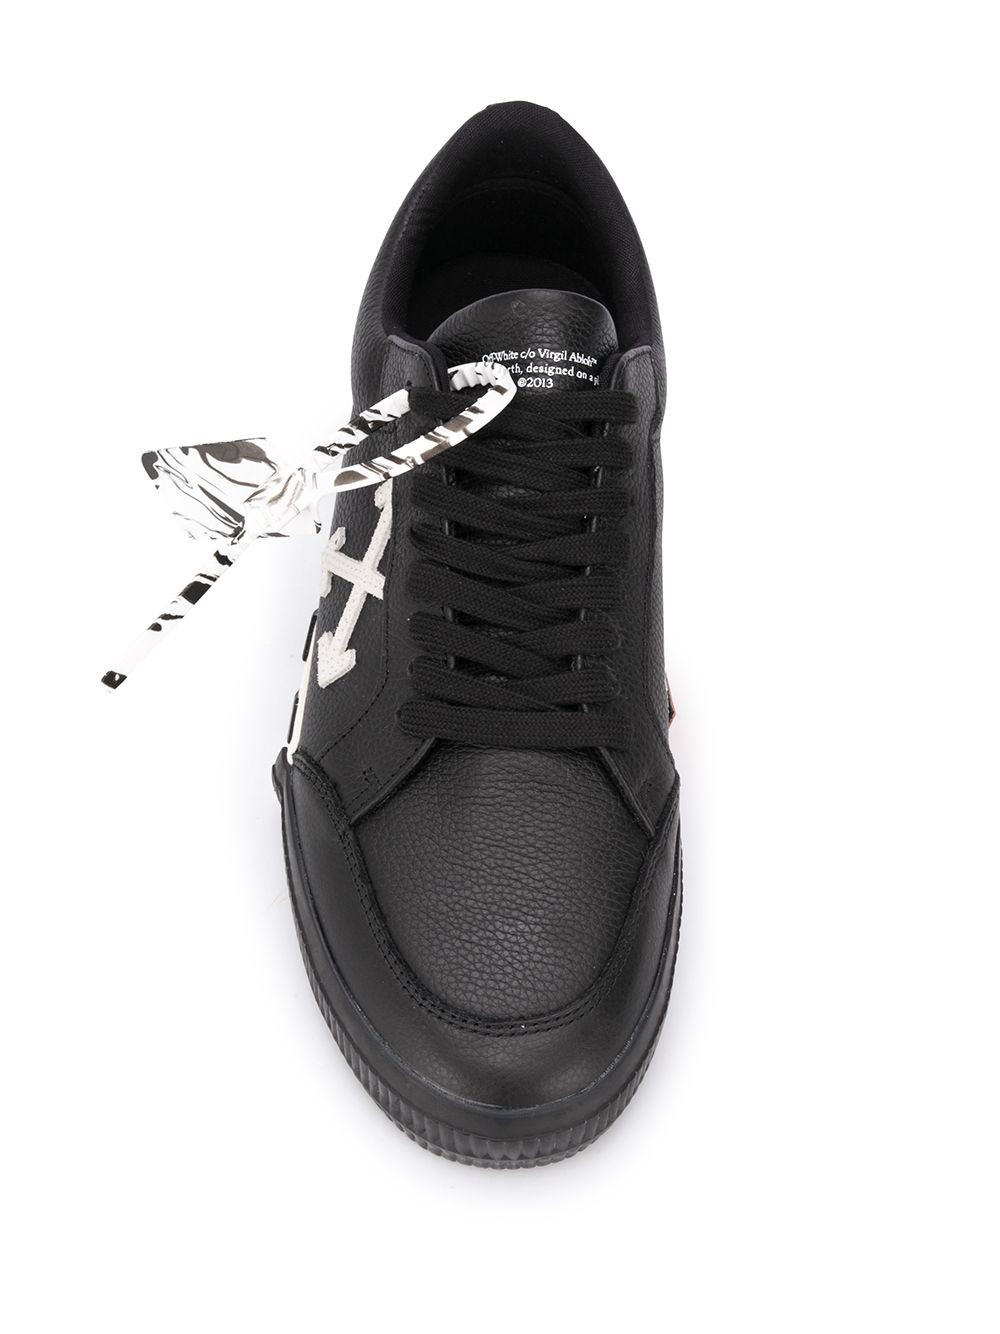 off-white LOW TOP SNEAKERS available on montiboutique.com - 34892